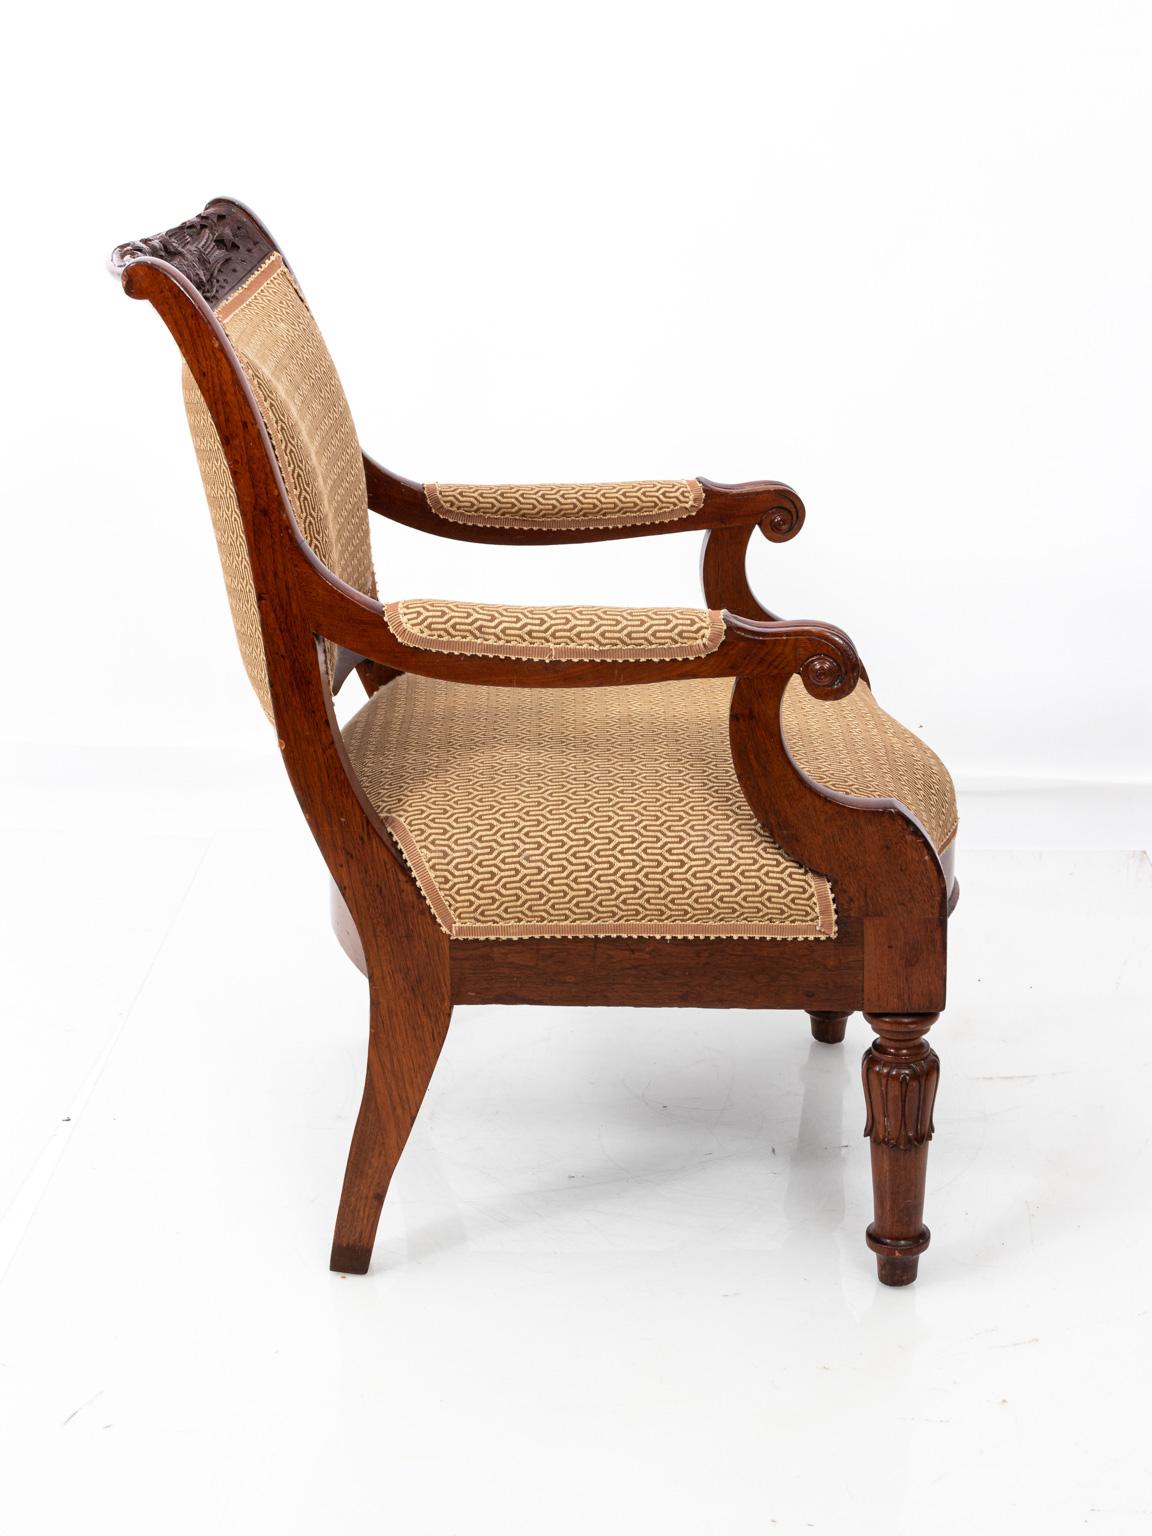 Irish Armchair with Upholstered Seat, circa 19th Century For Sale 2